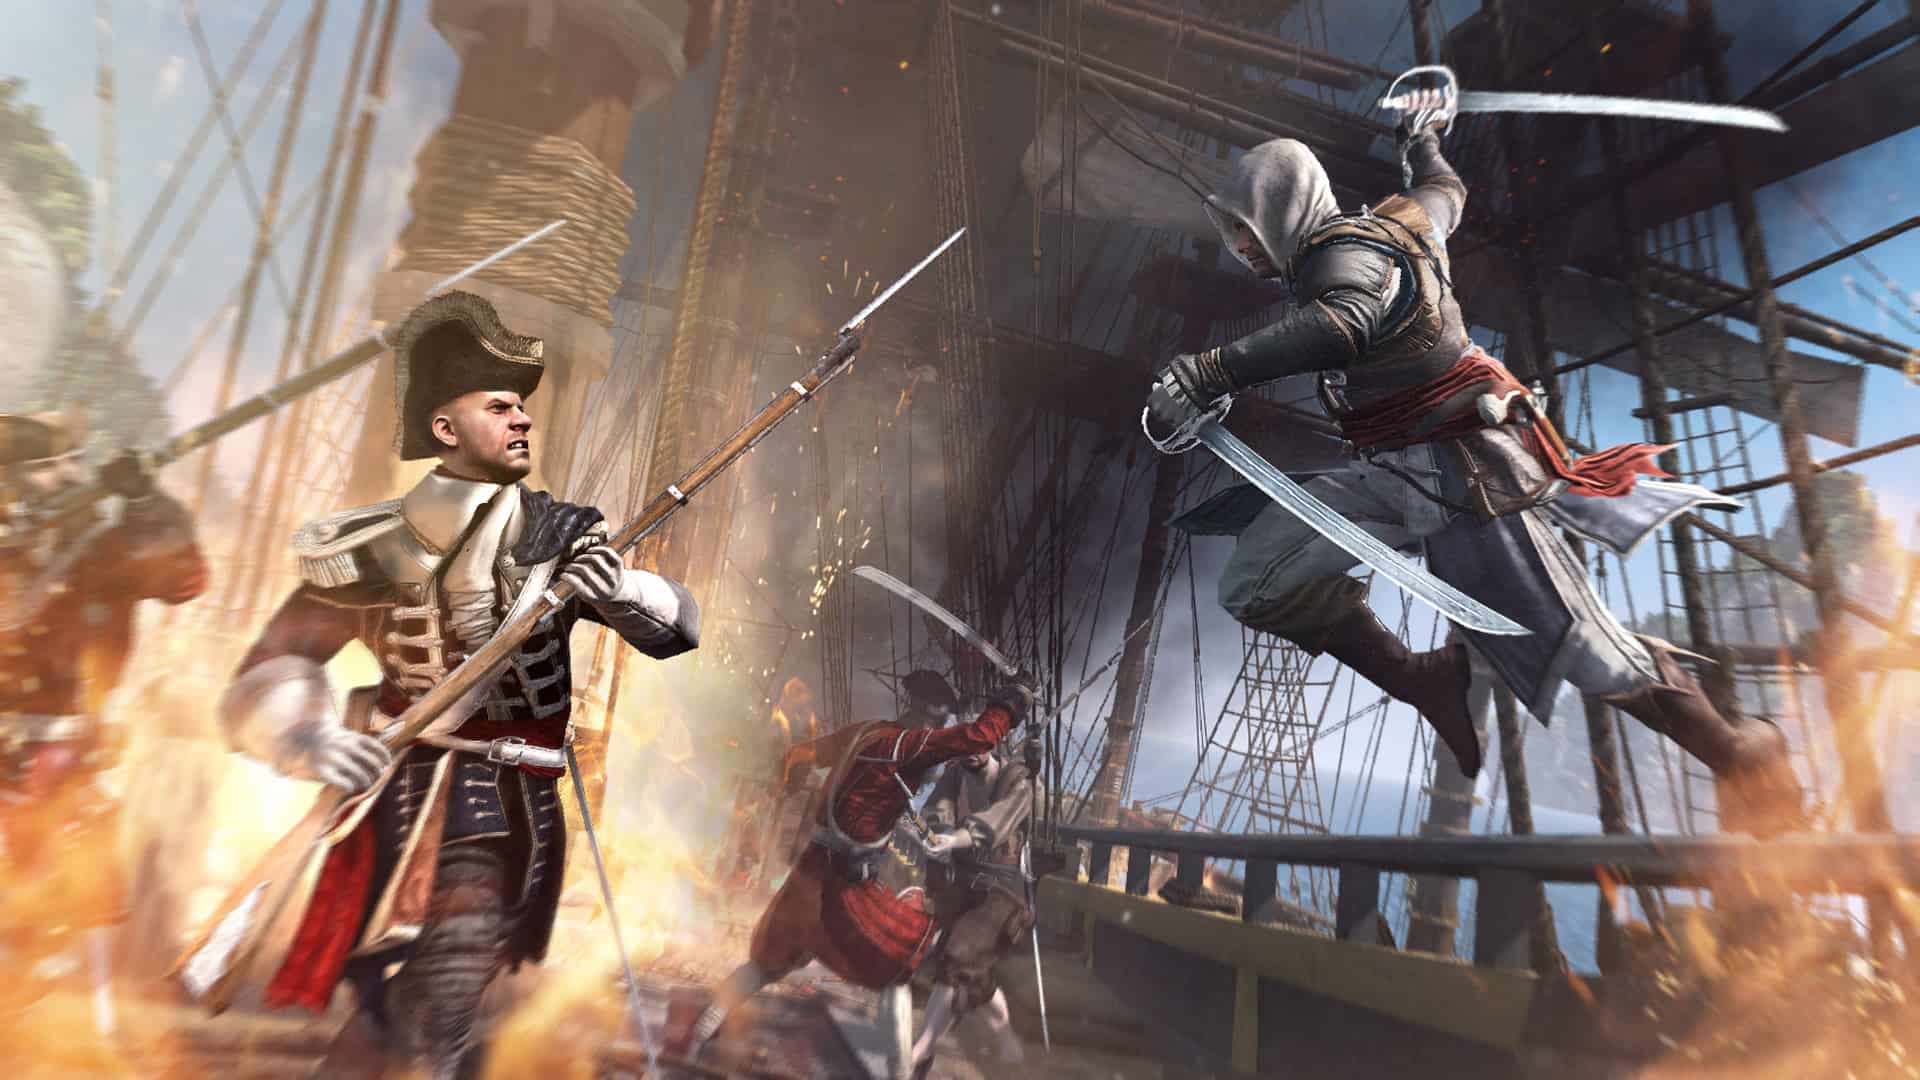 Edward Kenway fights British soldiers in Assassin's Creed IV: Black Flag.